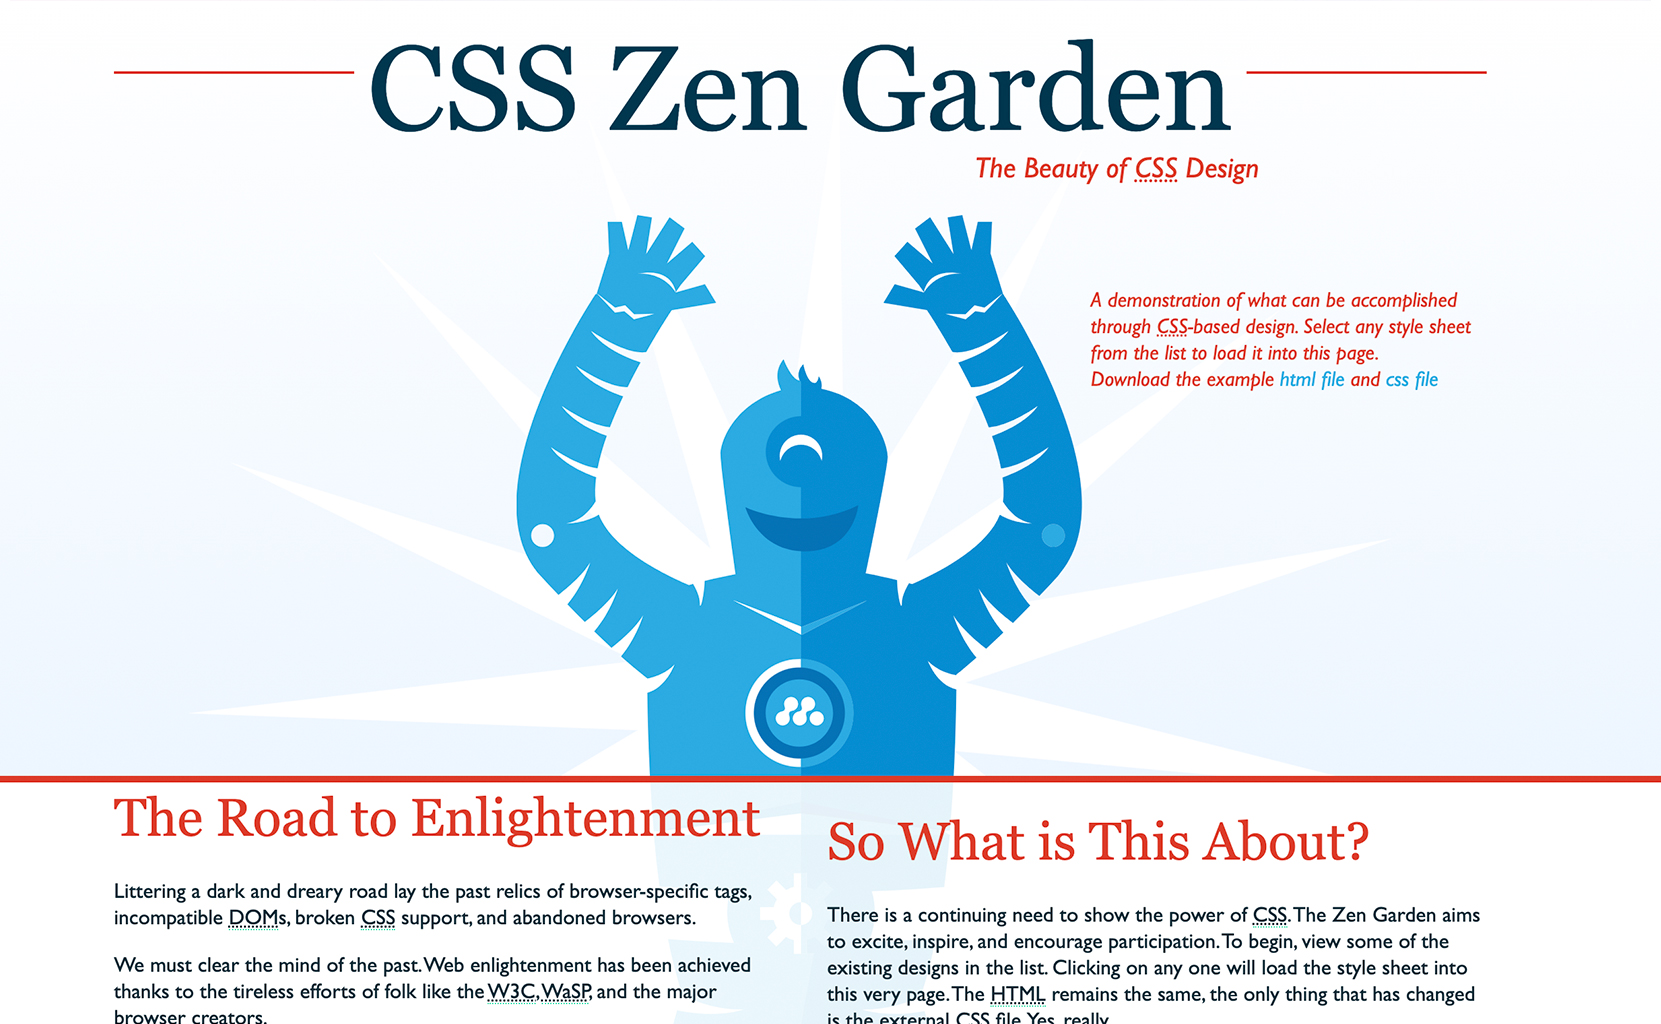 A modernist image of a HTML page from CSS Zen Garden